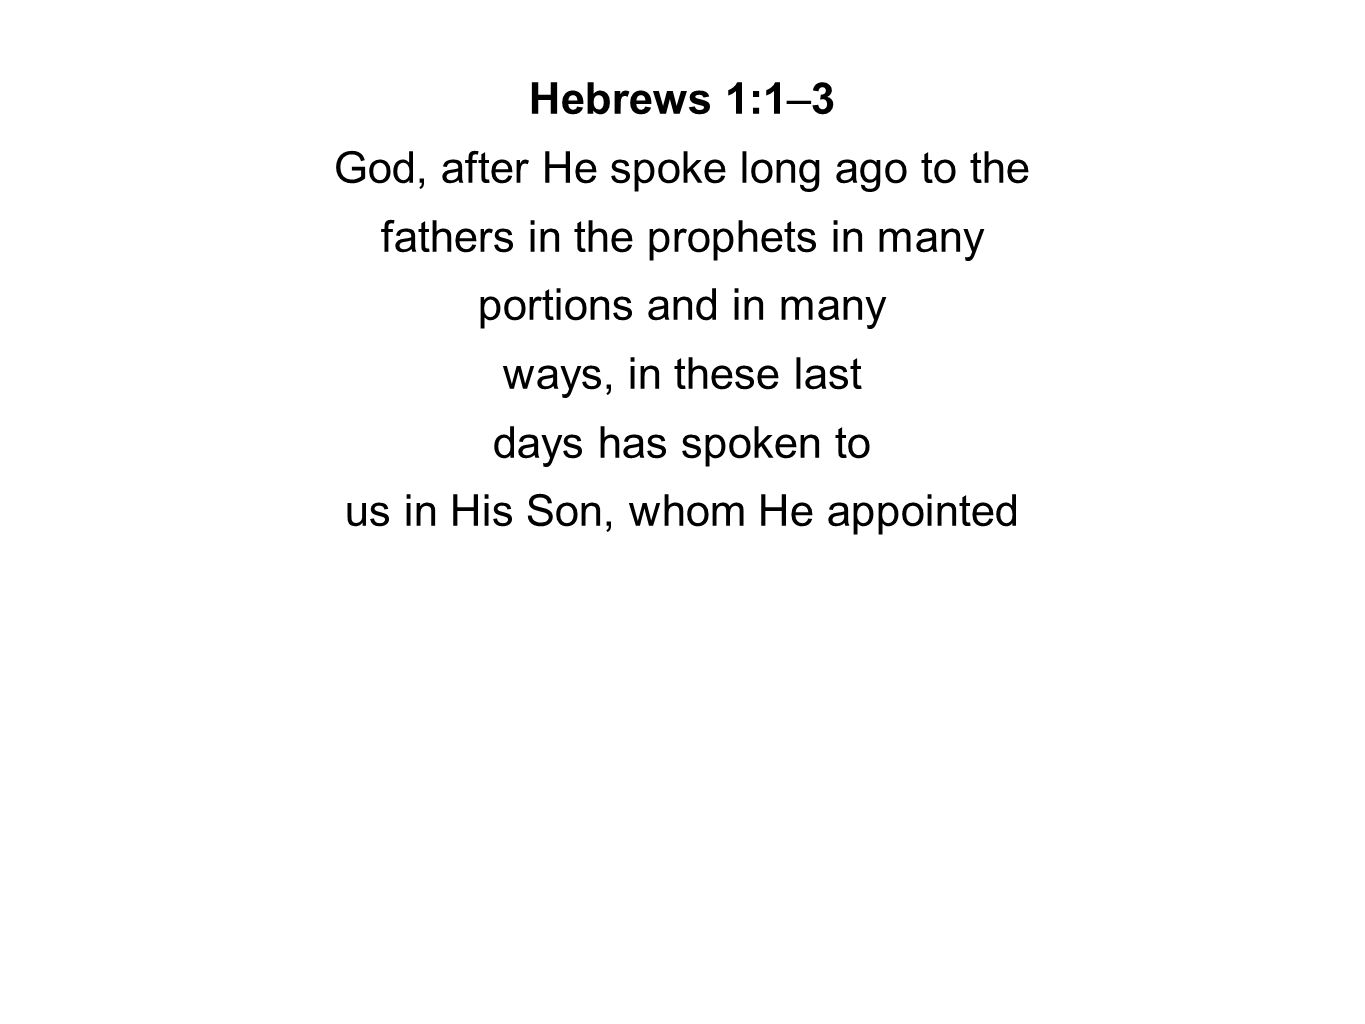 Hebrews 1:1–3 God, after He spoke long ago to the fathers in the prophets in many portions and in many ways, in these last days has spoken to us in His Son, whom He appointed